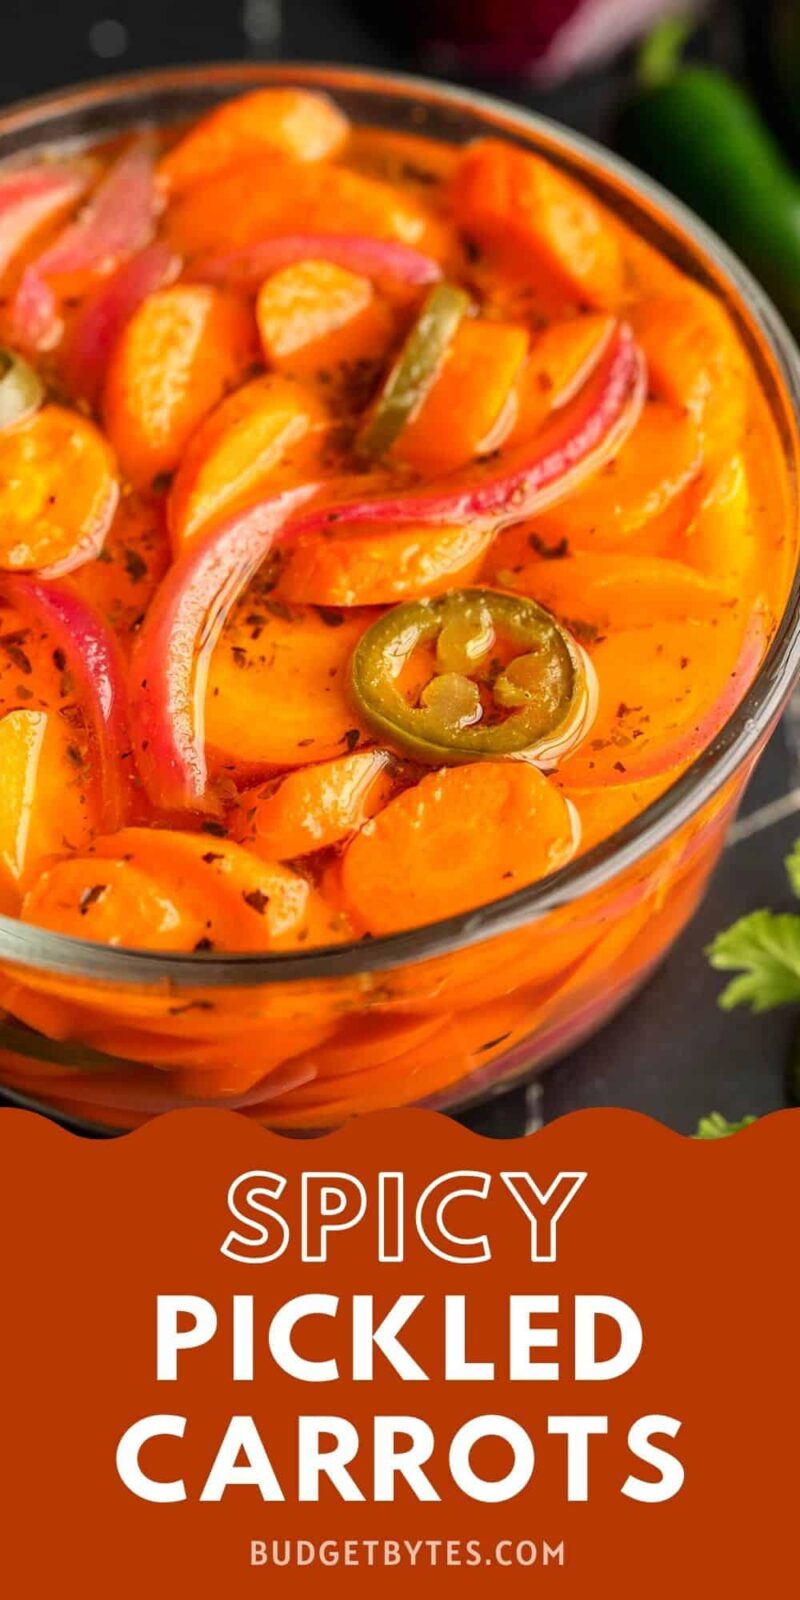 side view of a bowl of spicy pickled carrots, title text at the bottom.